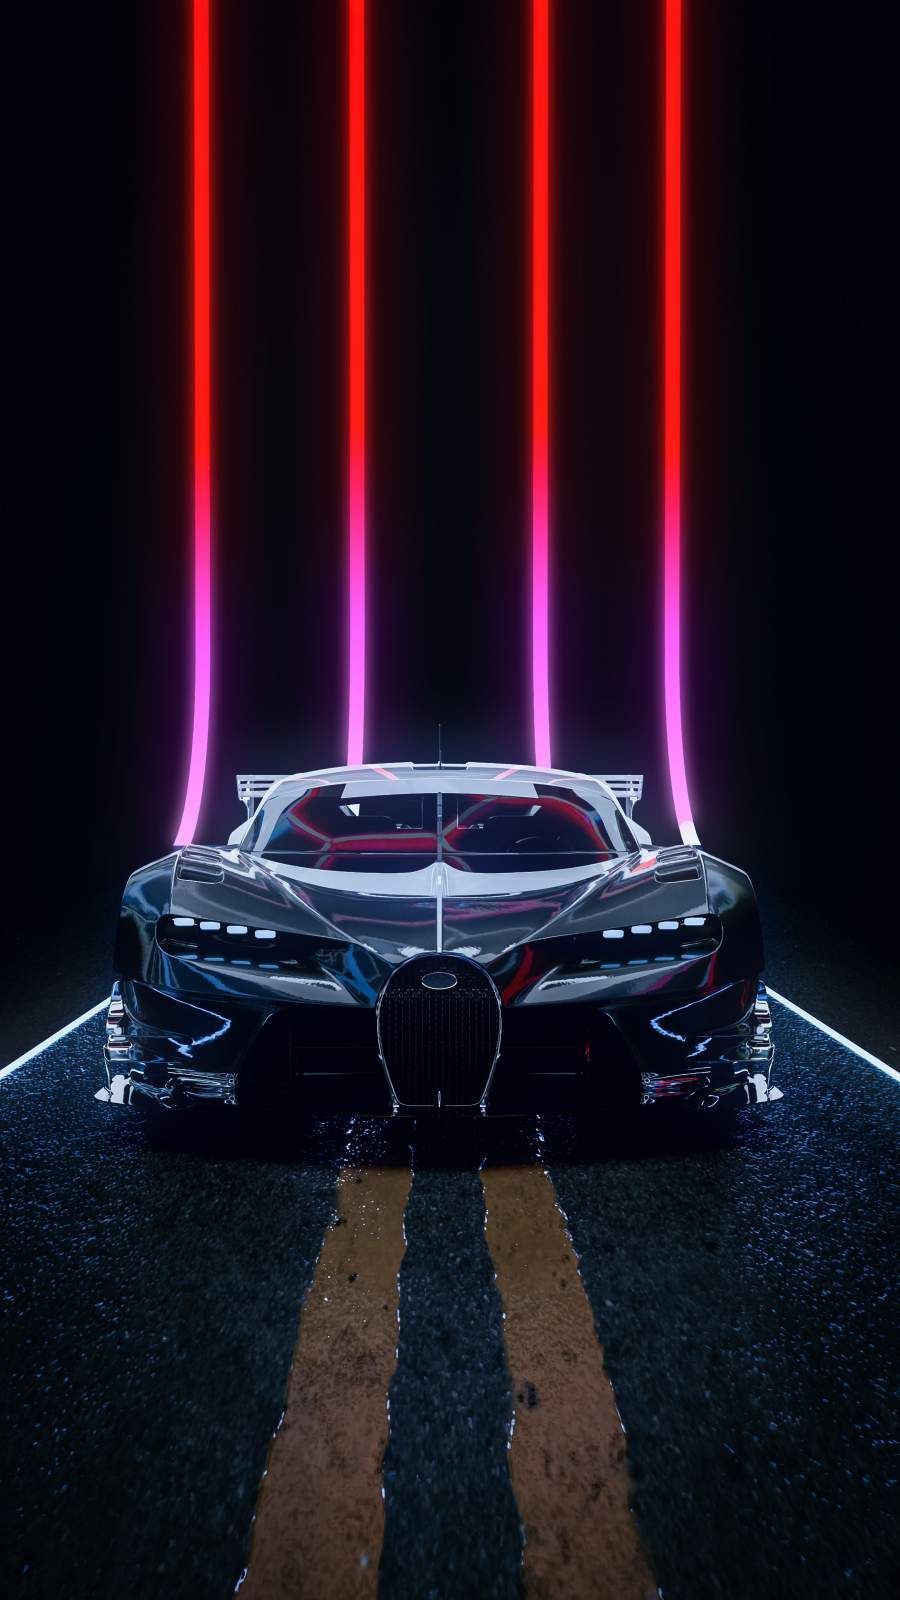 iPhone Wallpaper for iPhone iPhone iPhone X, iPhone XR, iPhone 8 Plus High Quality Wallpaper, iPad Bac. Bugatti wallpaper, Bugatti cars, Car wallpaper